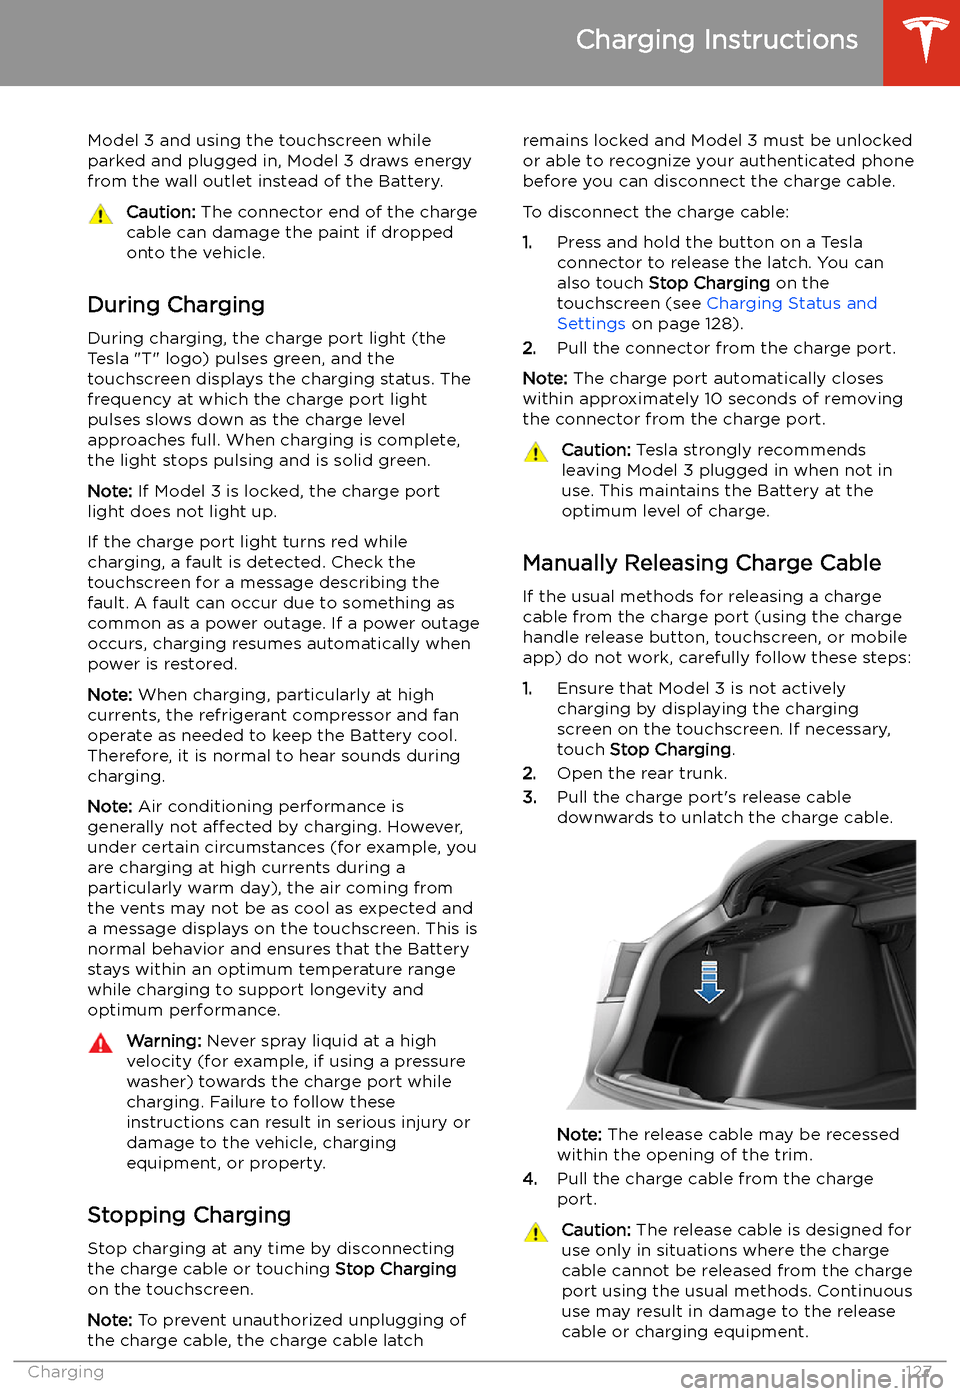 TESLA MODEL 3 2019  Owners Manual (Europe) Model 3 and using the touchscreen whileparked and plugged in, Model 3 draws energyfrom the wall outlet instead of the Battery.Caution:  The connector end of the charge
cable can damage the paint if dr